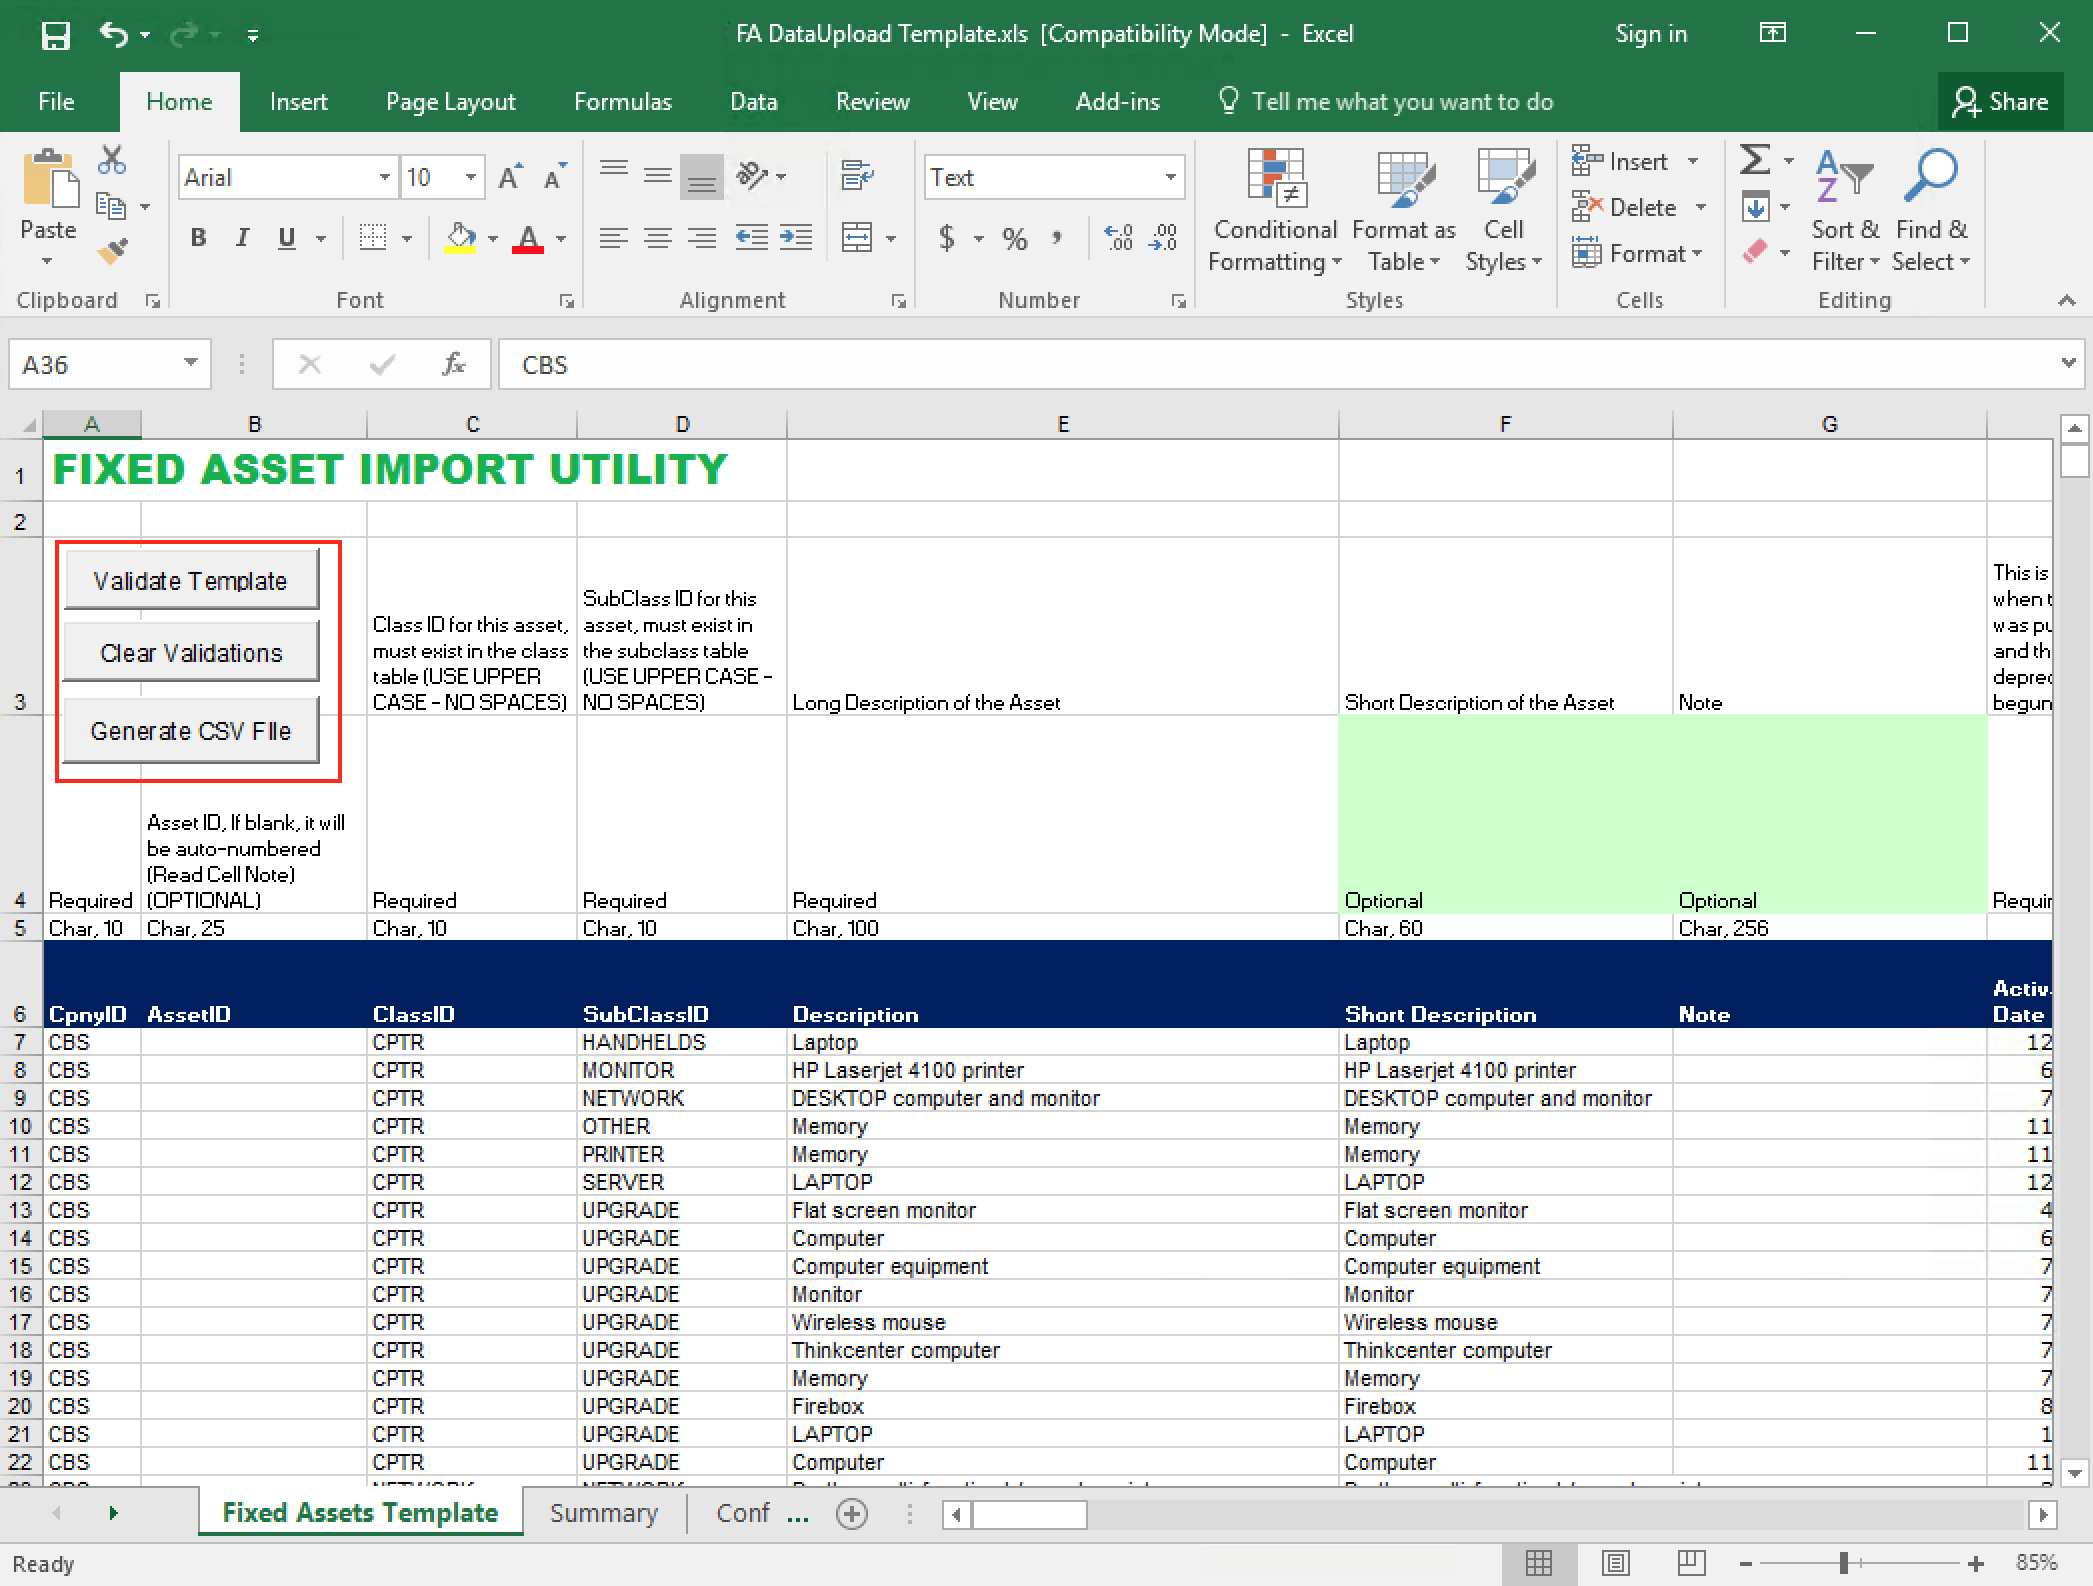 Fixed Asset Spreadsheet for Fixed Assets  M5 Team